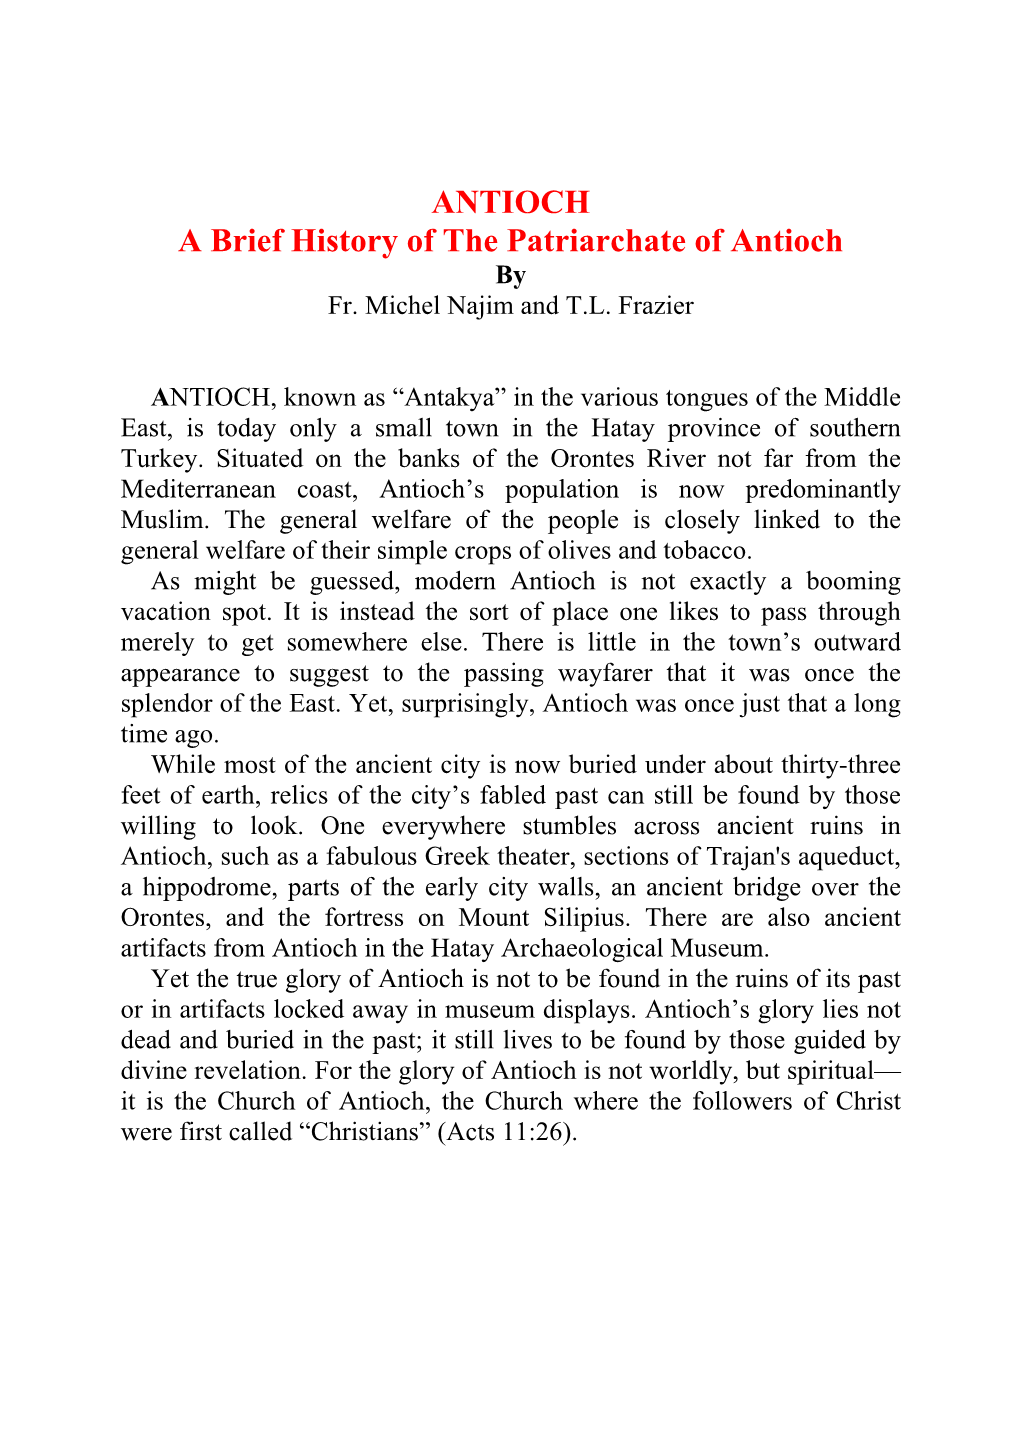 ANTIOCH a Brief History of the Patriarchate of Antioch by Fr